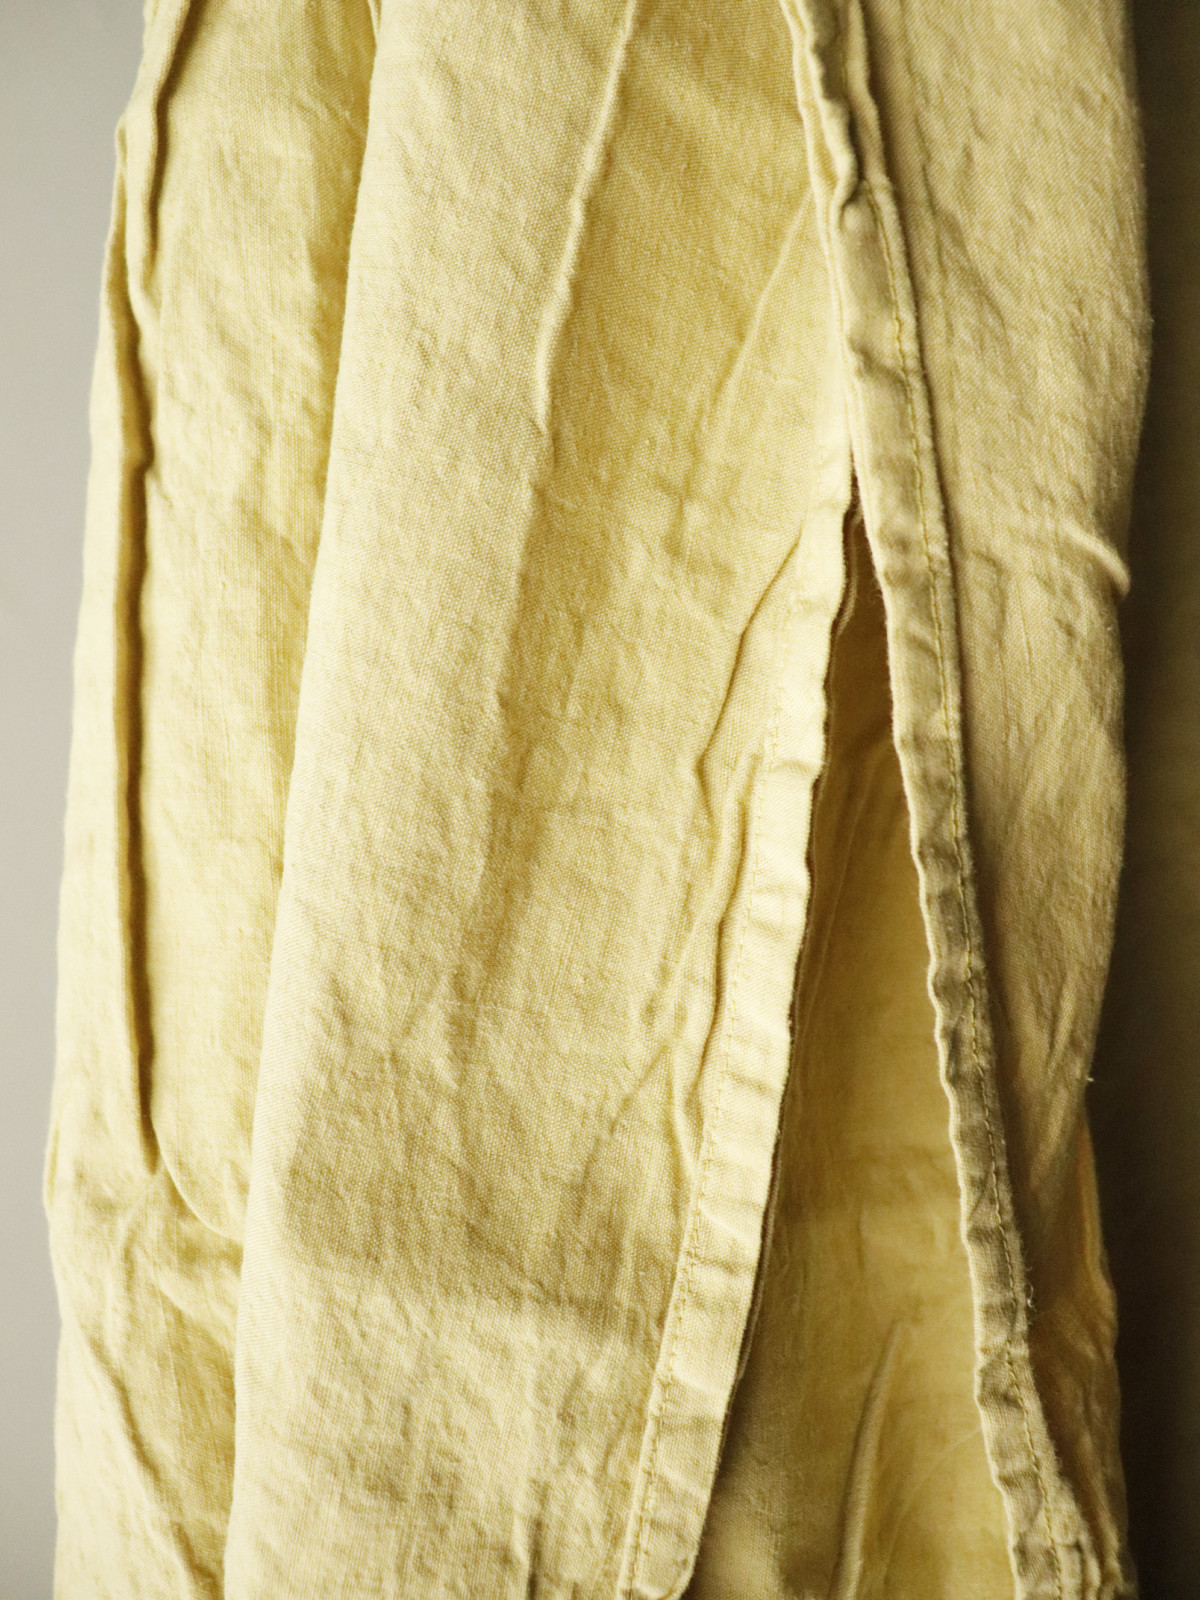 Early1900’s, French dyed linen fabric, linen sheet